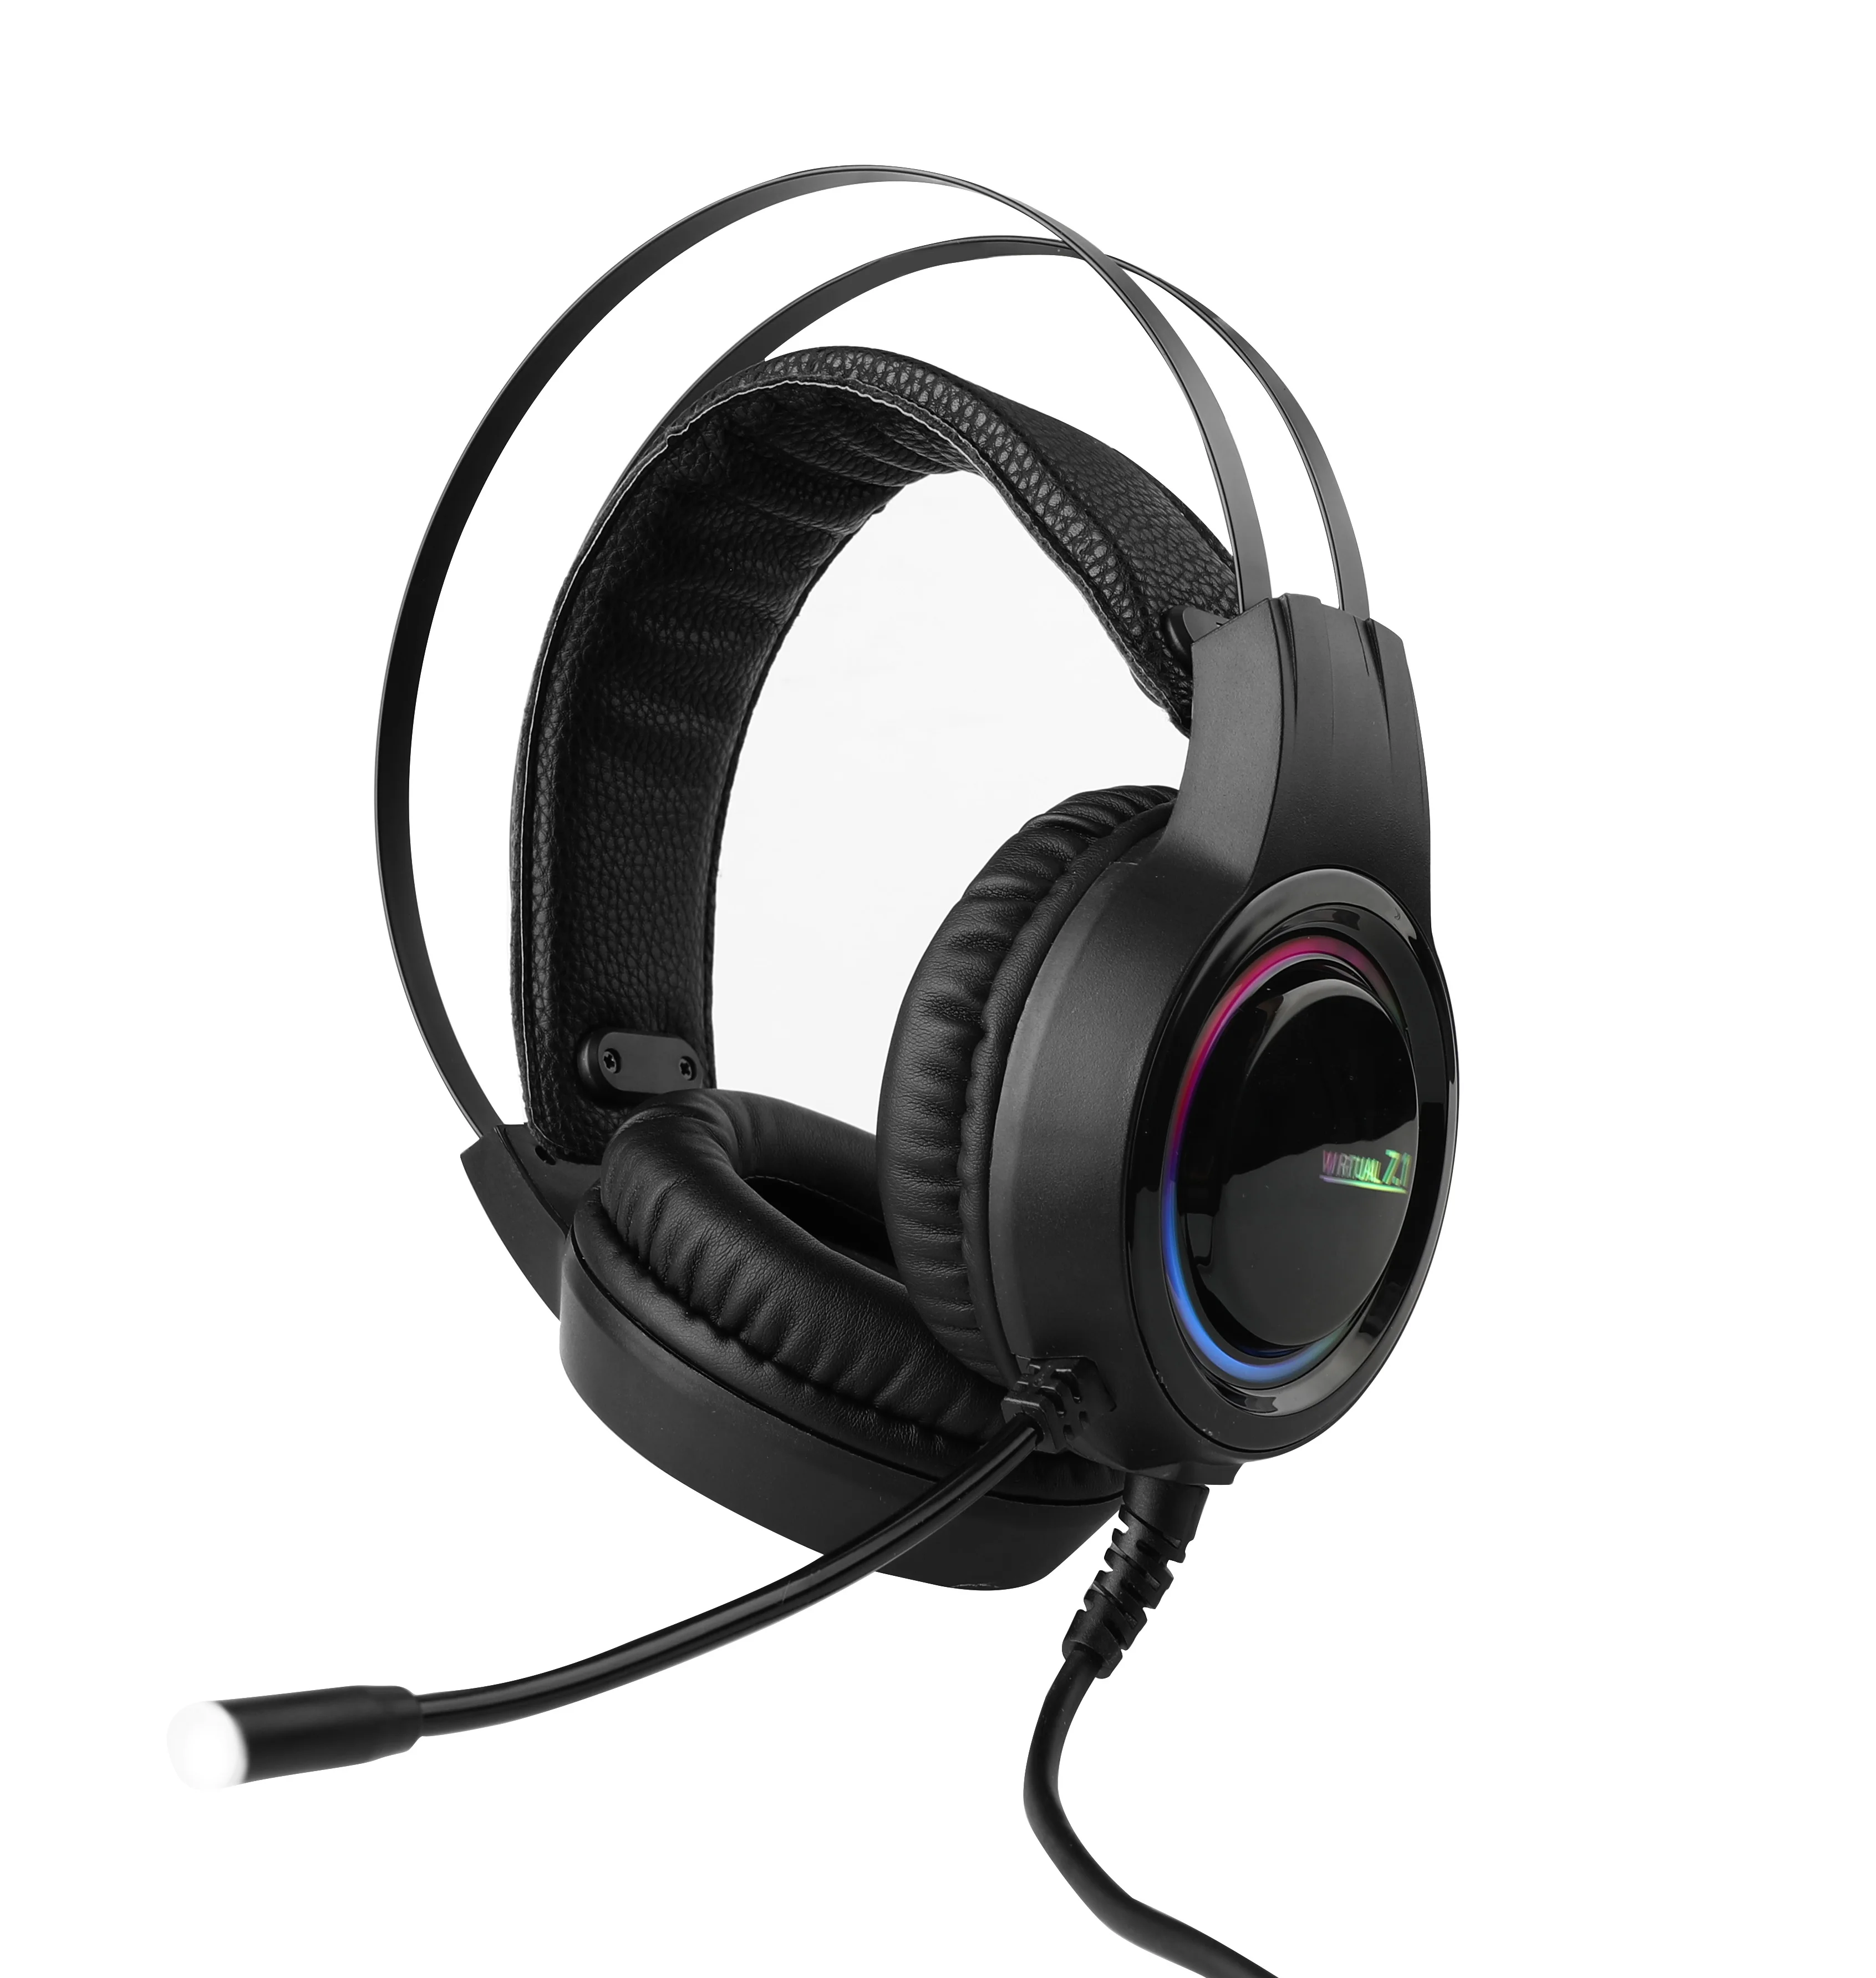 

Best Headphone PS5/PS4 Headband Games Audifonos 7.1 Surround Gamer Headphones Noise Cancelling Gaming Headset With Mic